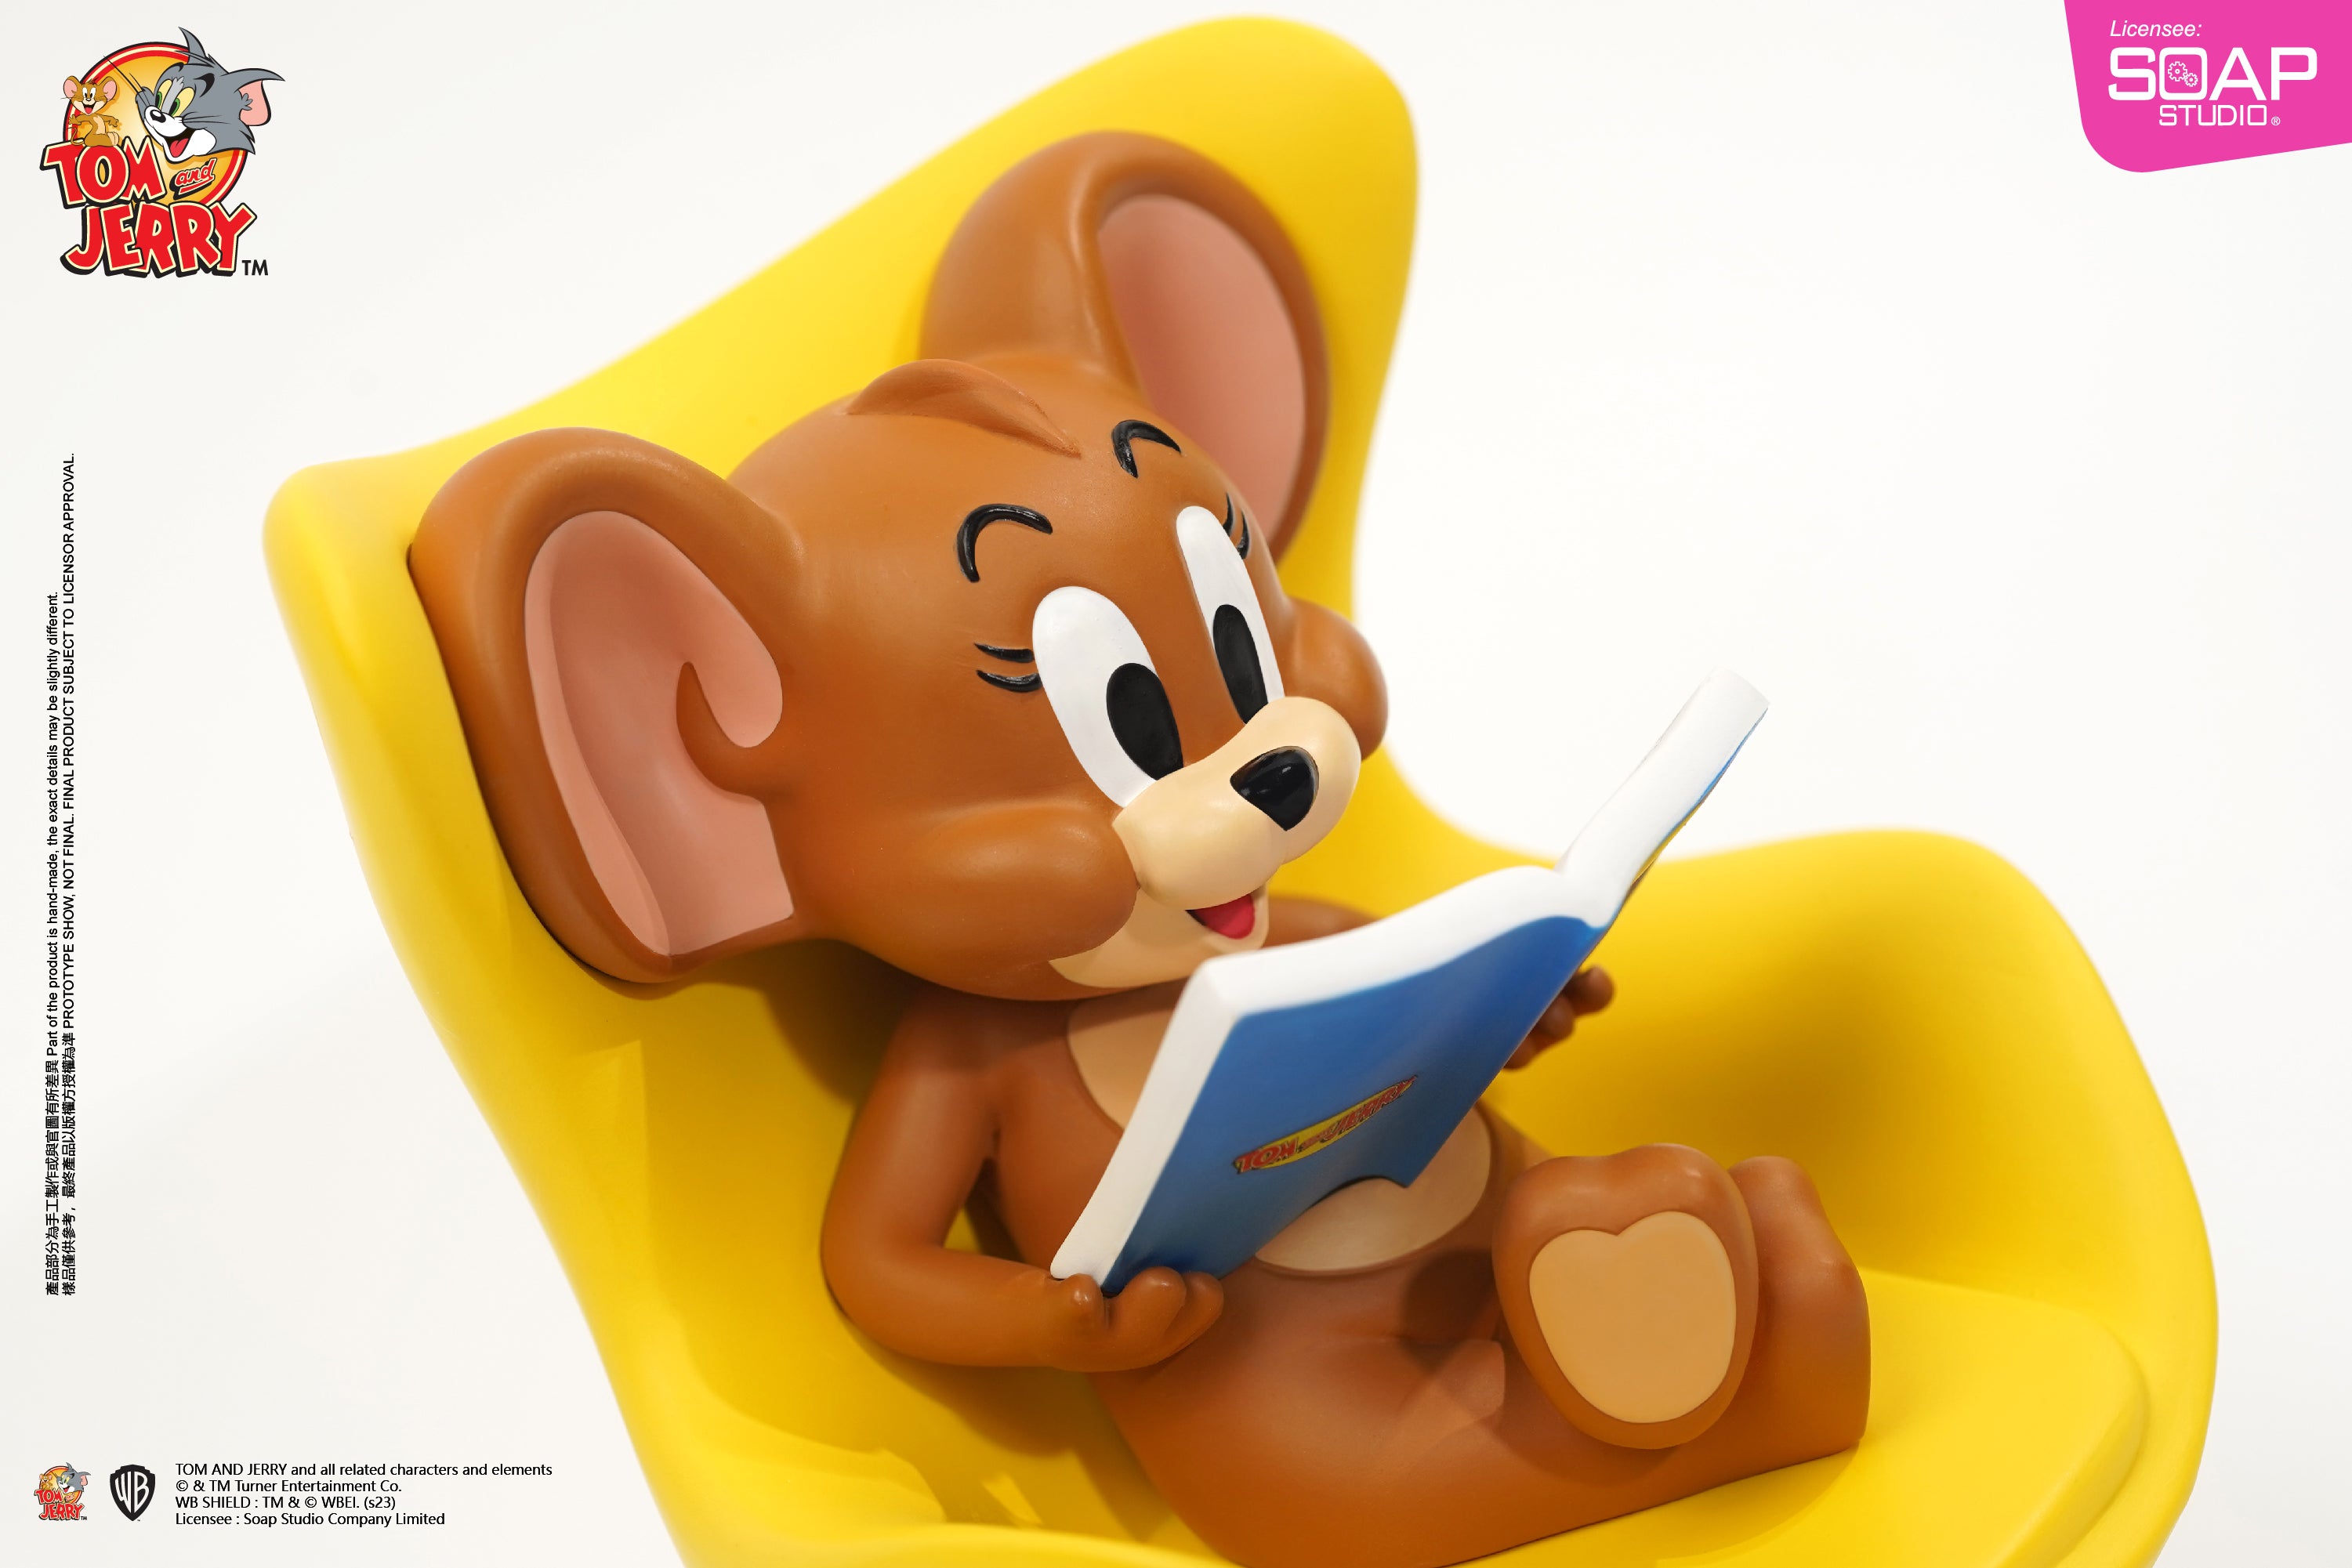 Soap Studio CA292 Tom and Jerry – Jerry's Reading Time Statue